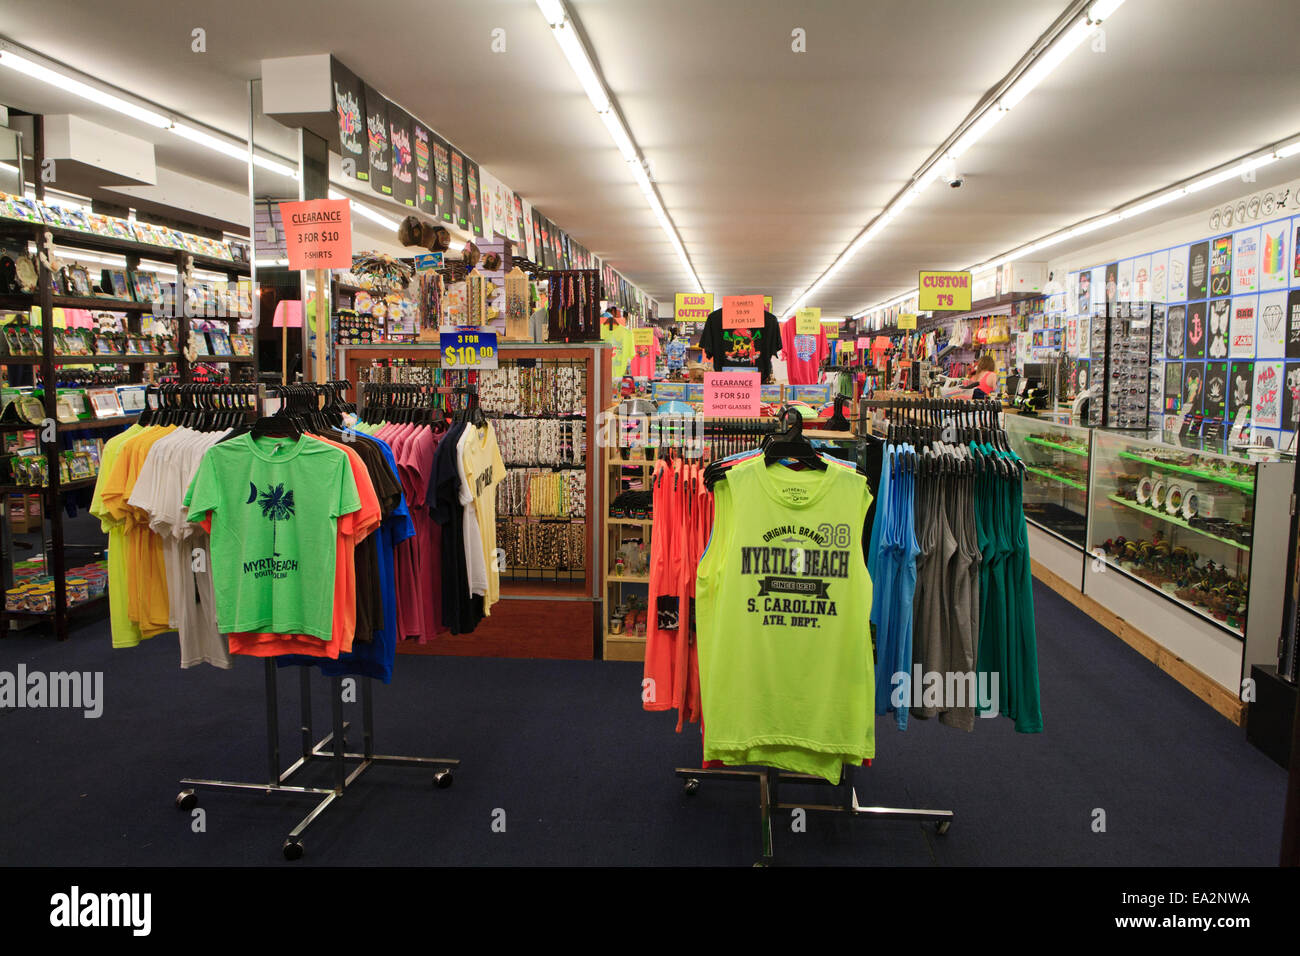 Inside of a store in Myrtle Beach South Carolina, with t-shirts and end of season discounts. Stock Photo